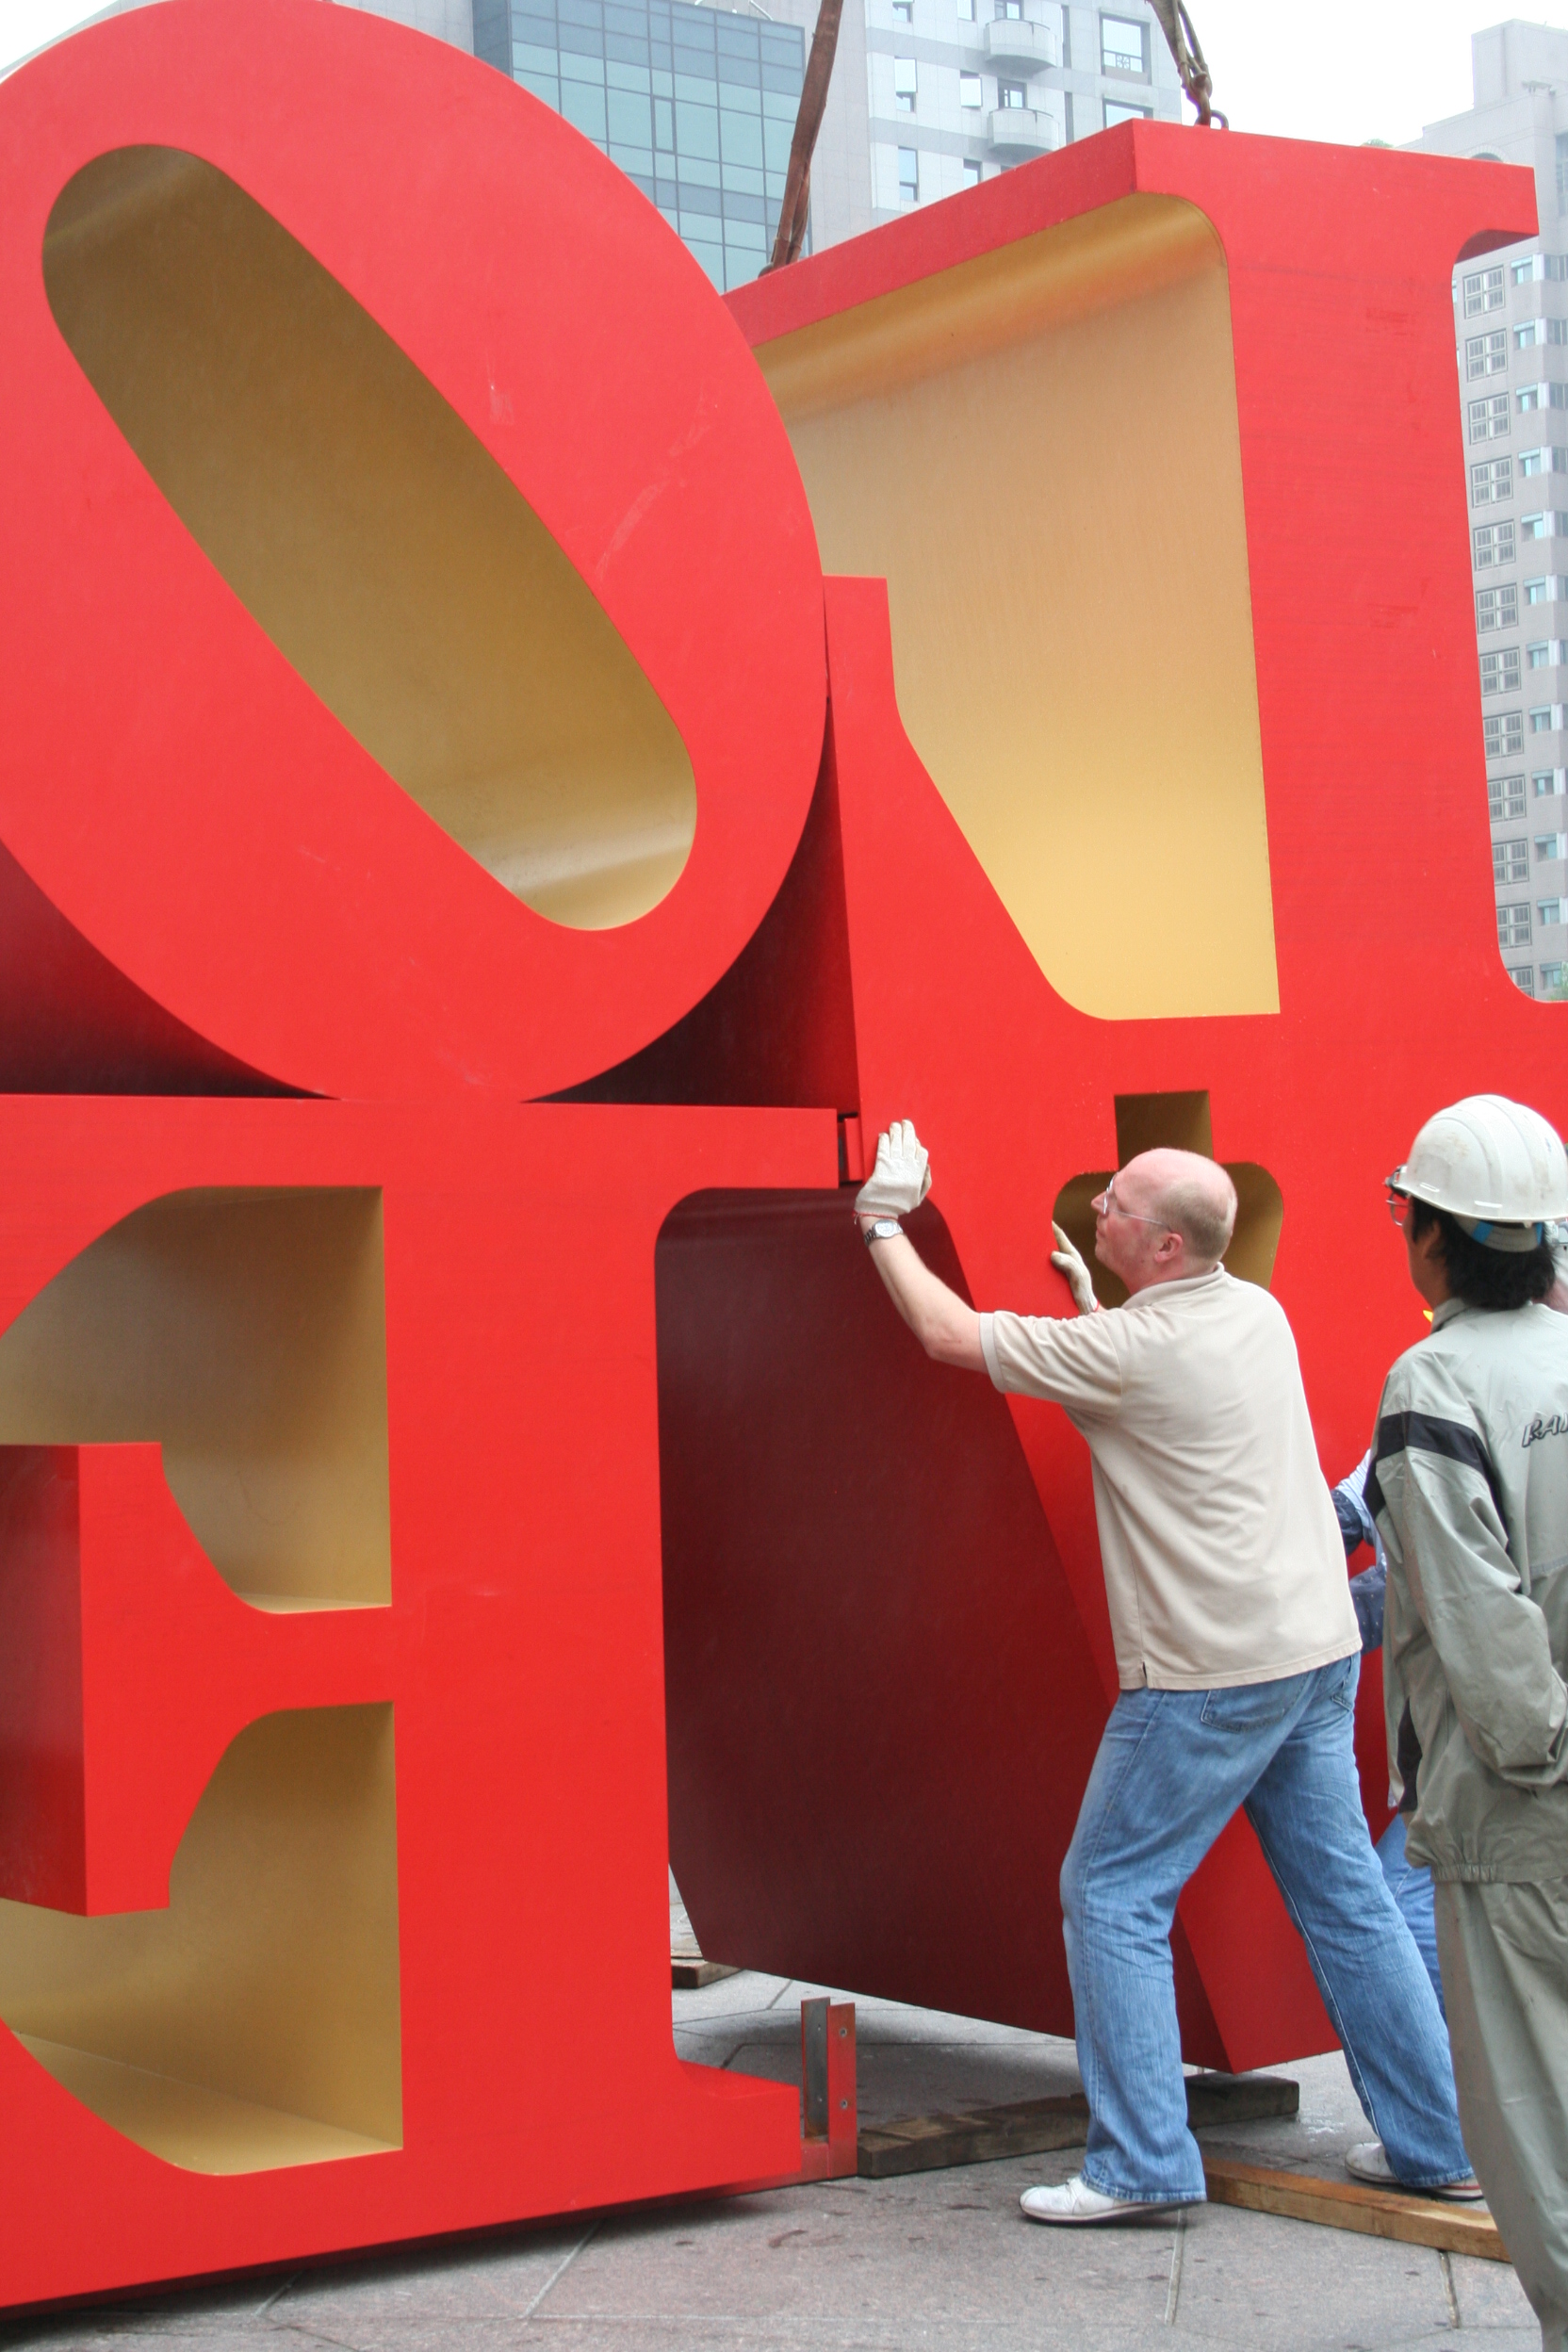 At the Taipei installation site of LOVE by iconic artist Robert Indiana.